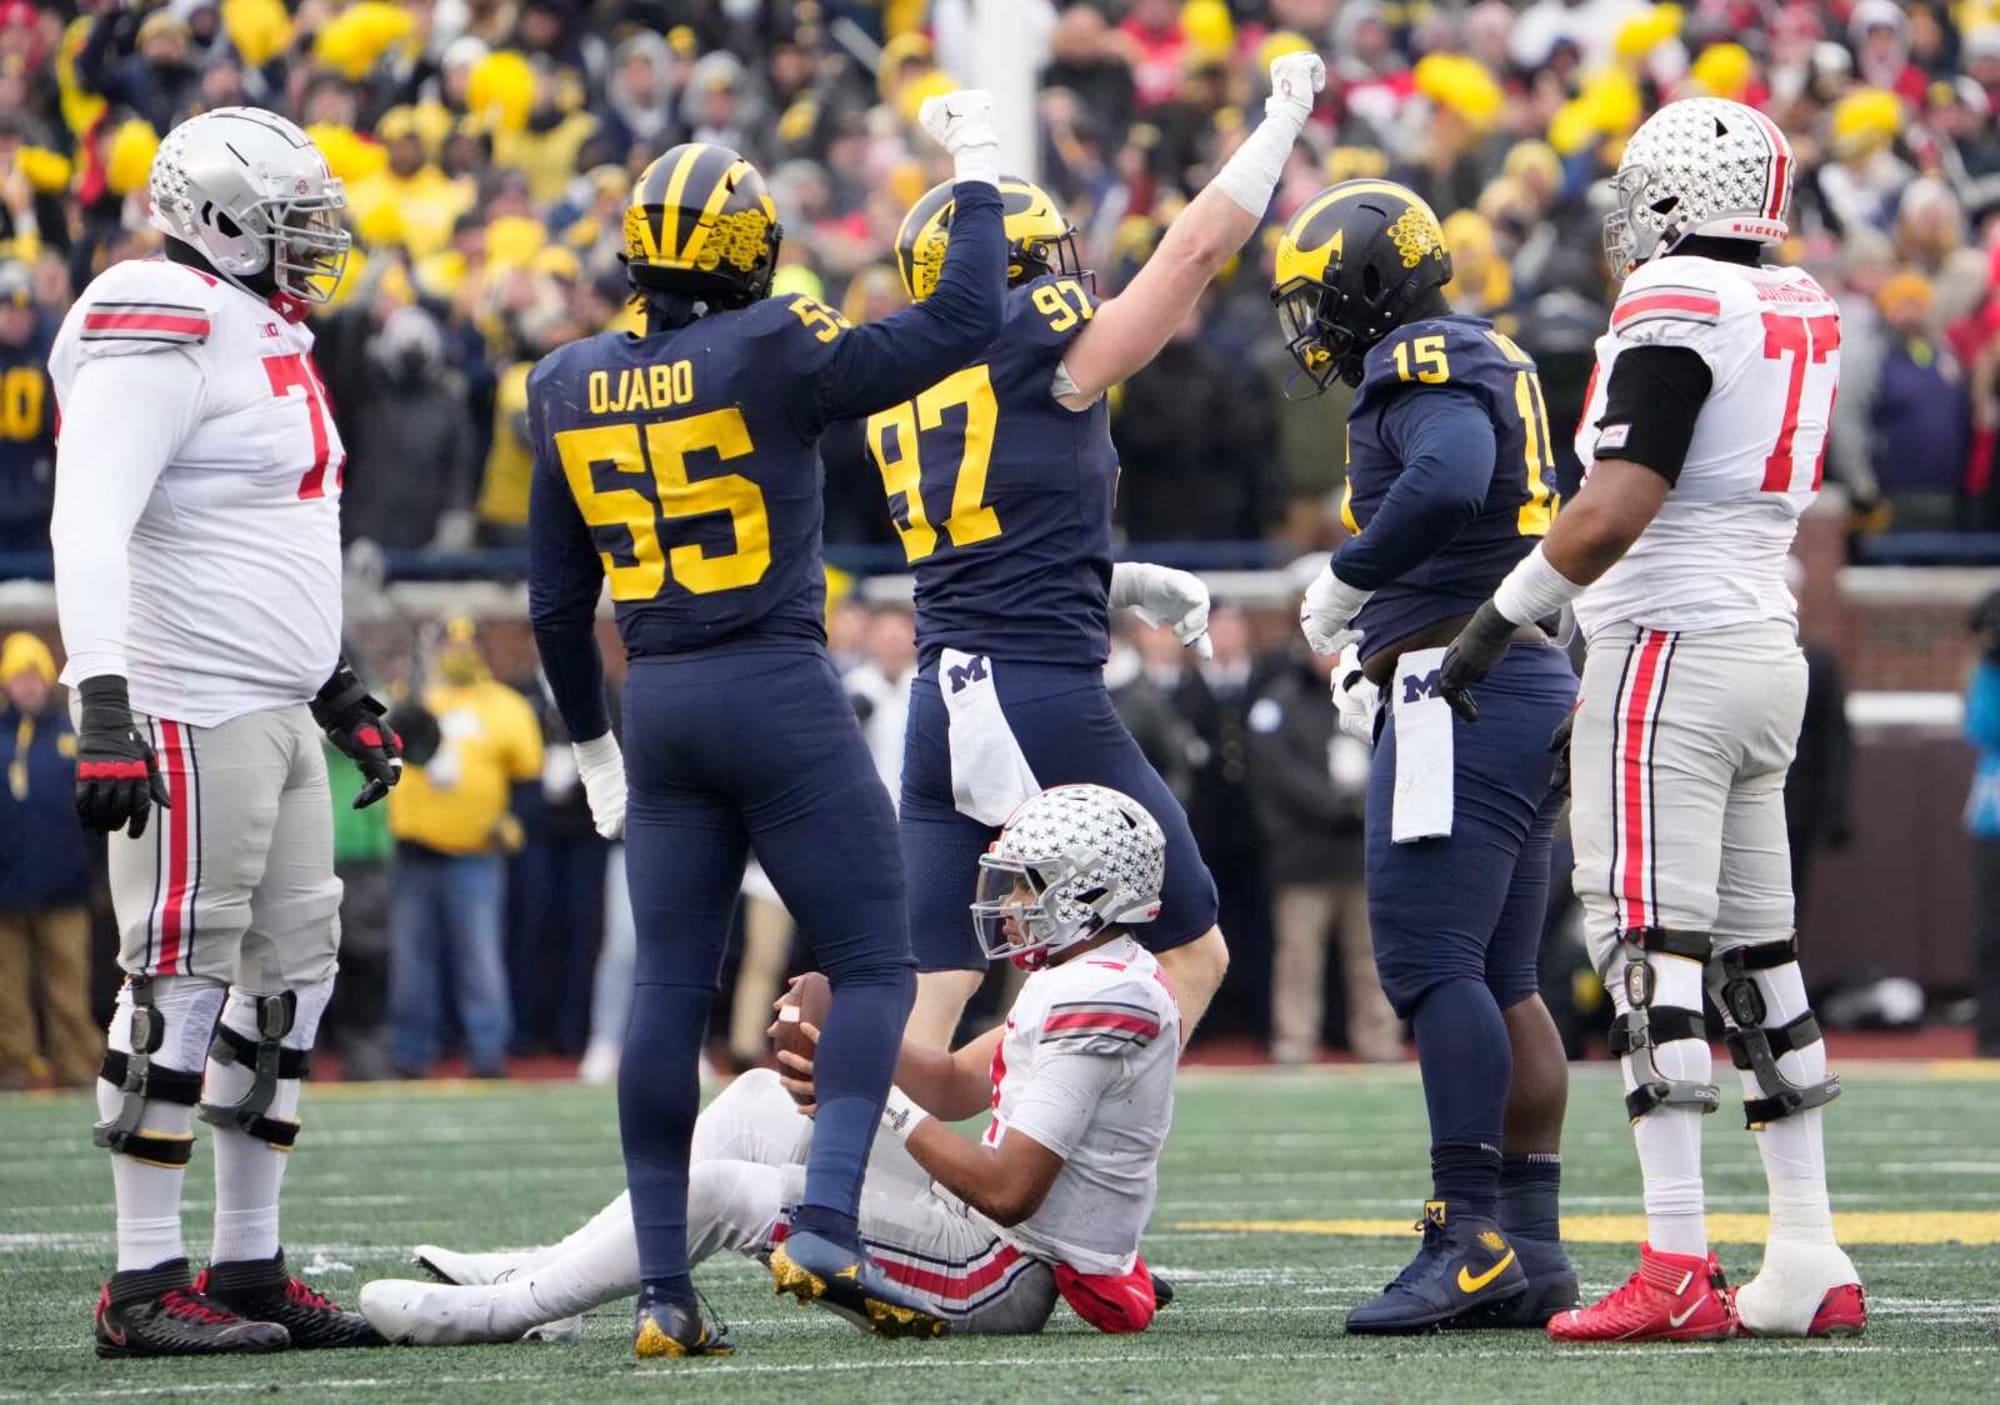 Michigan Football 3 takeaways from surreal win over Ohio State Page 3